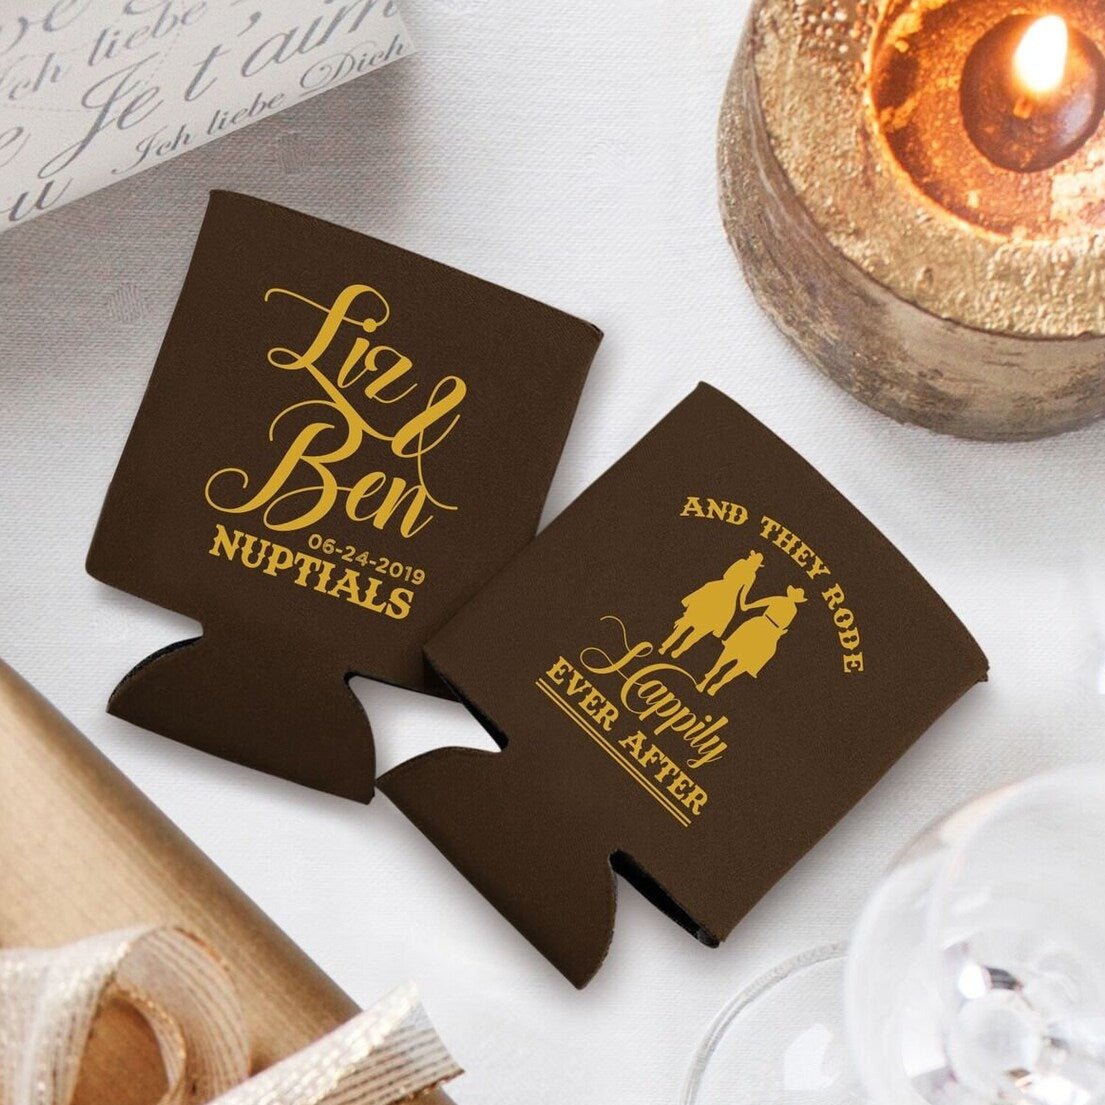 Happily Ever After Koozie - Forever Wedding Favors